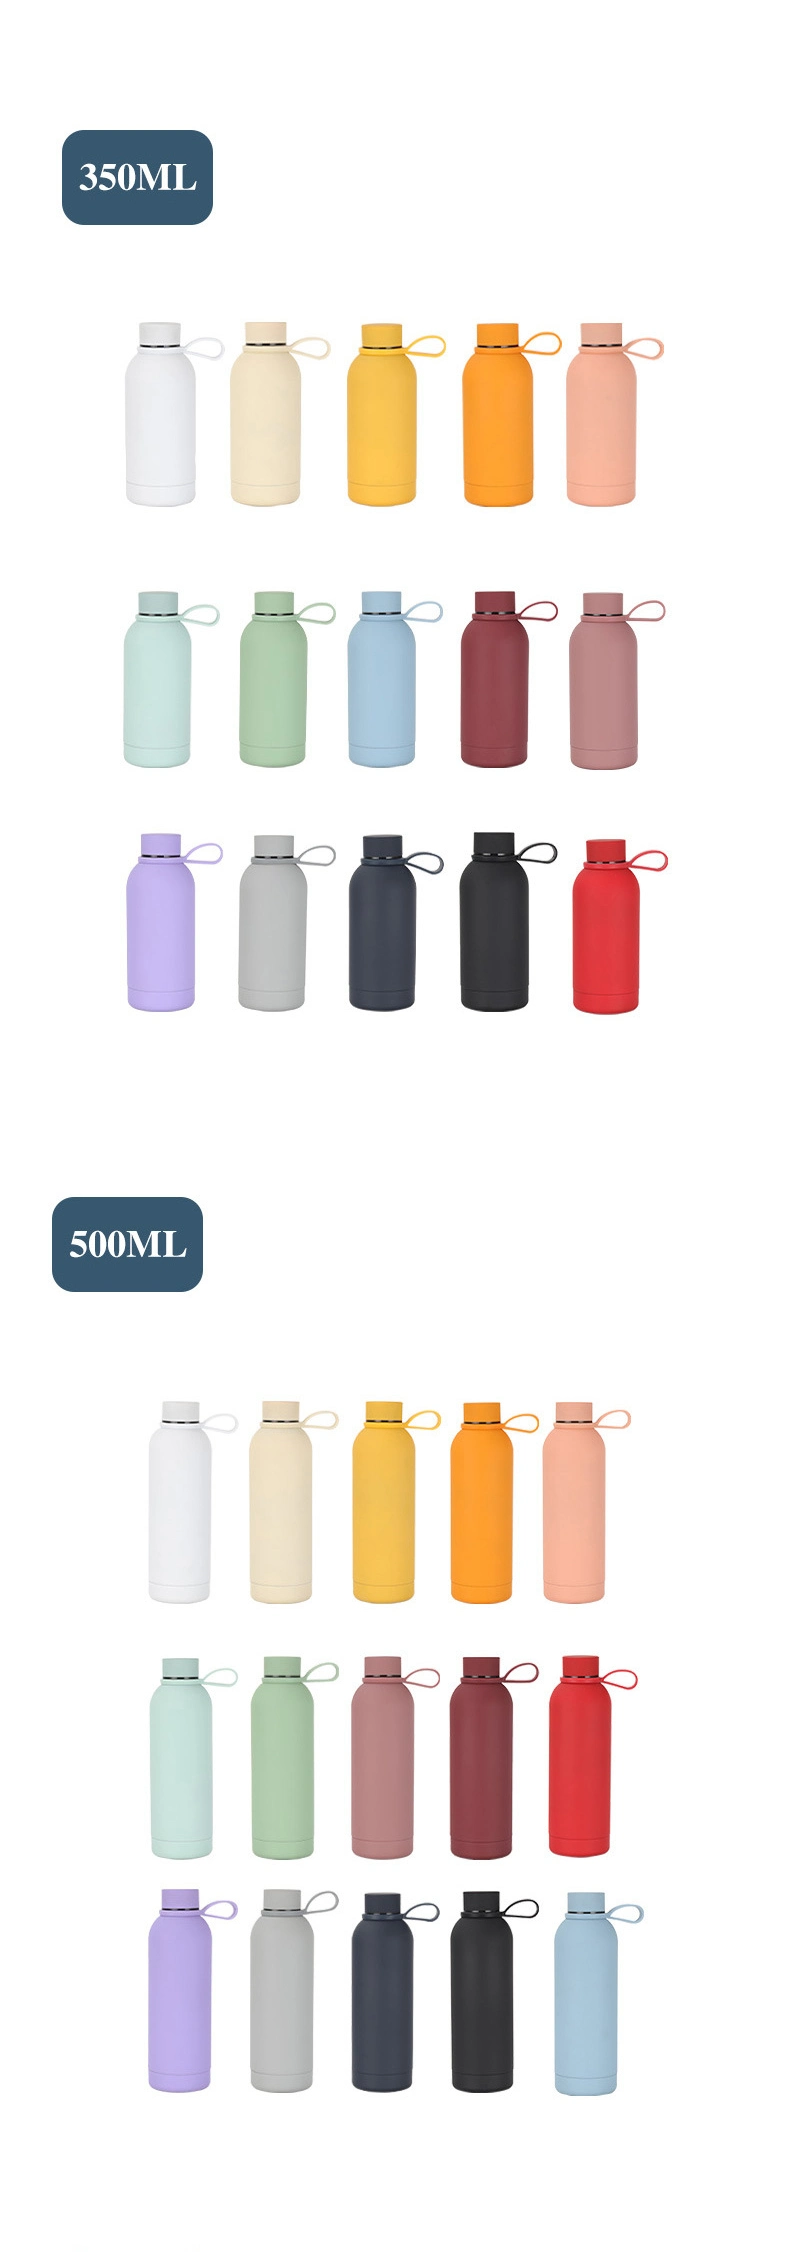 Hot Selling Stainless Steel Sports Water Bottle Thermos Insulated Vacuum Flask in 4 Sizes